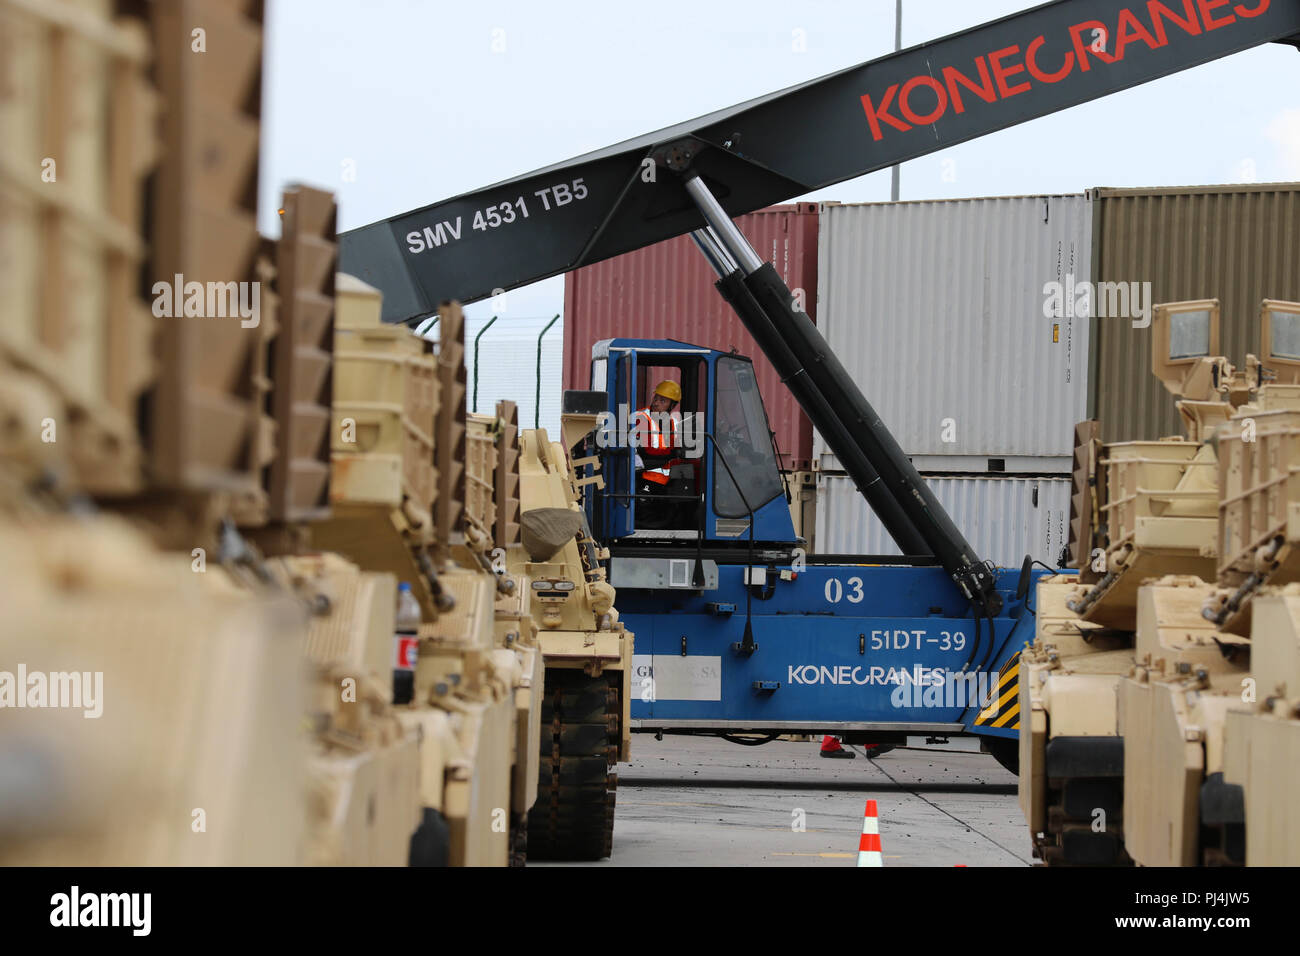 An Employee With The Deepwater Container Terminal Drives A Forklift To Move Containers For The 2nd Squadron 278th Armored Cavalry Regiment A National Guard Unit Based Out Of Knoxville Tennessee In The